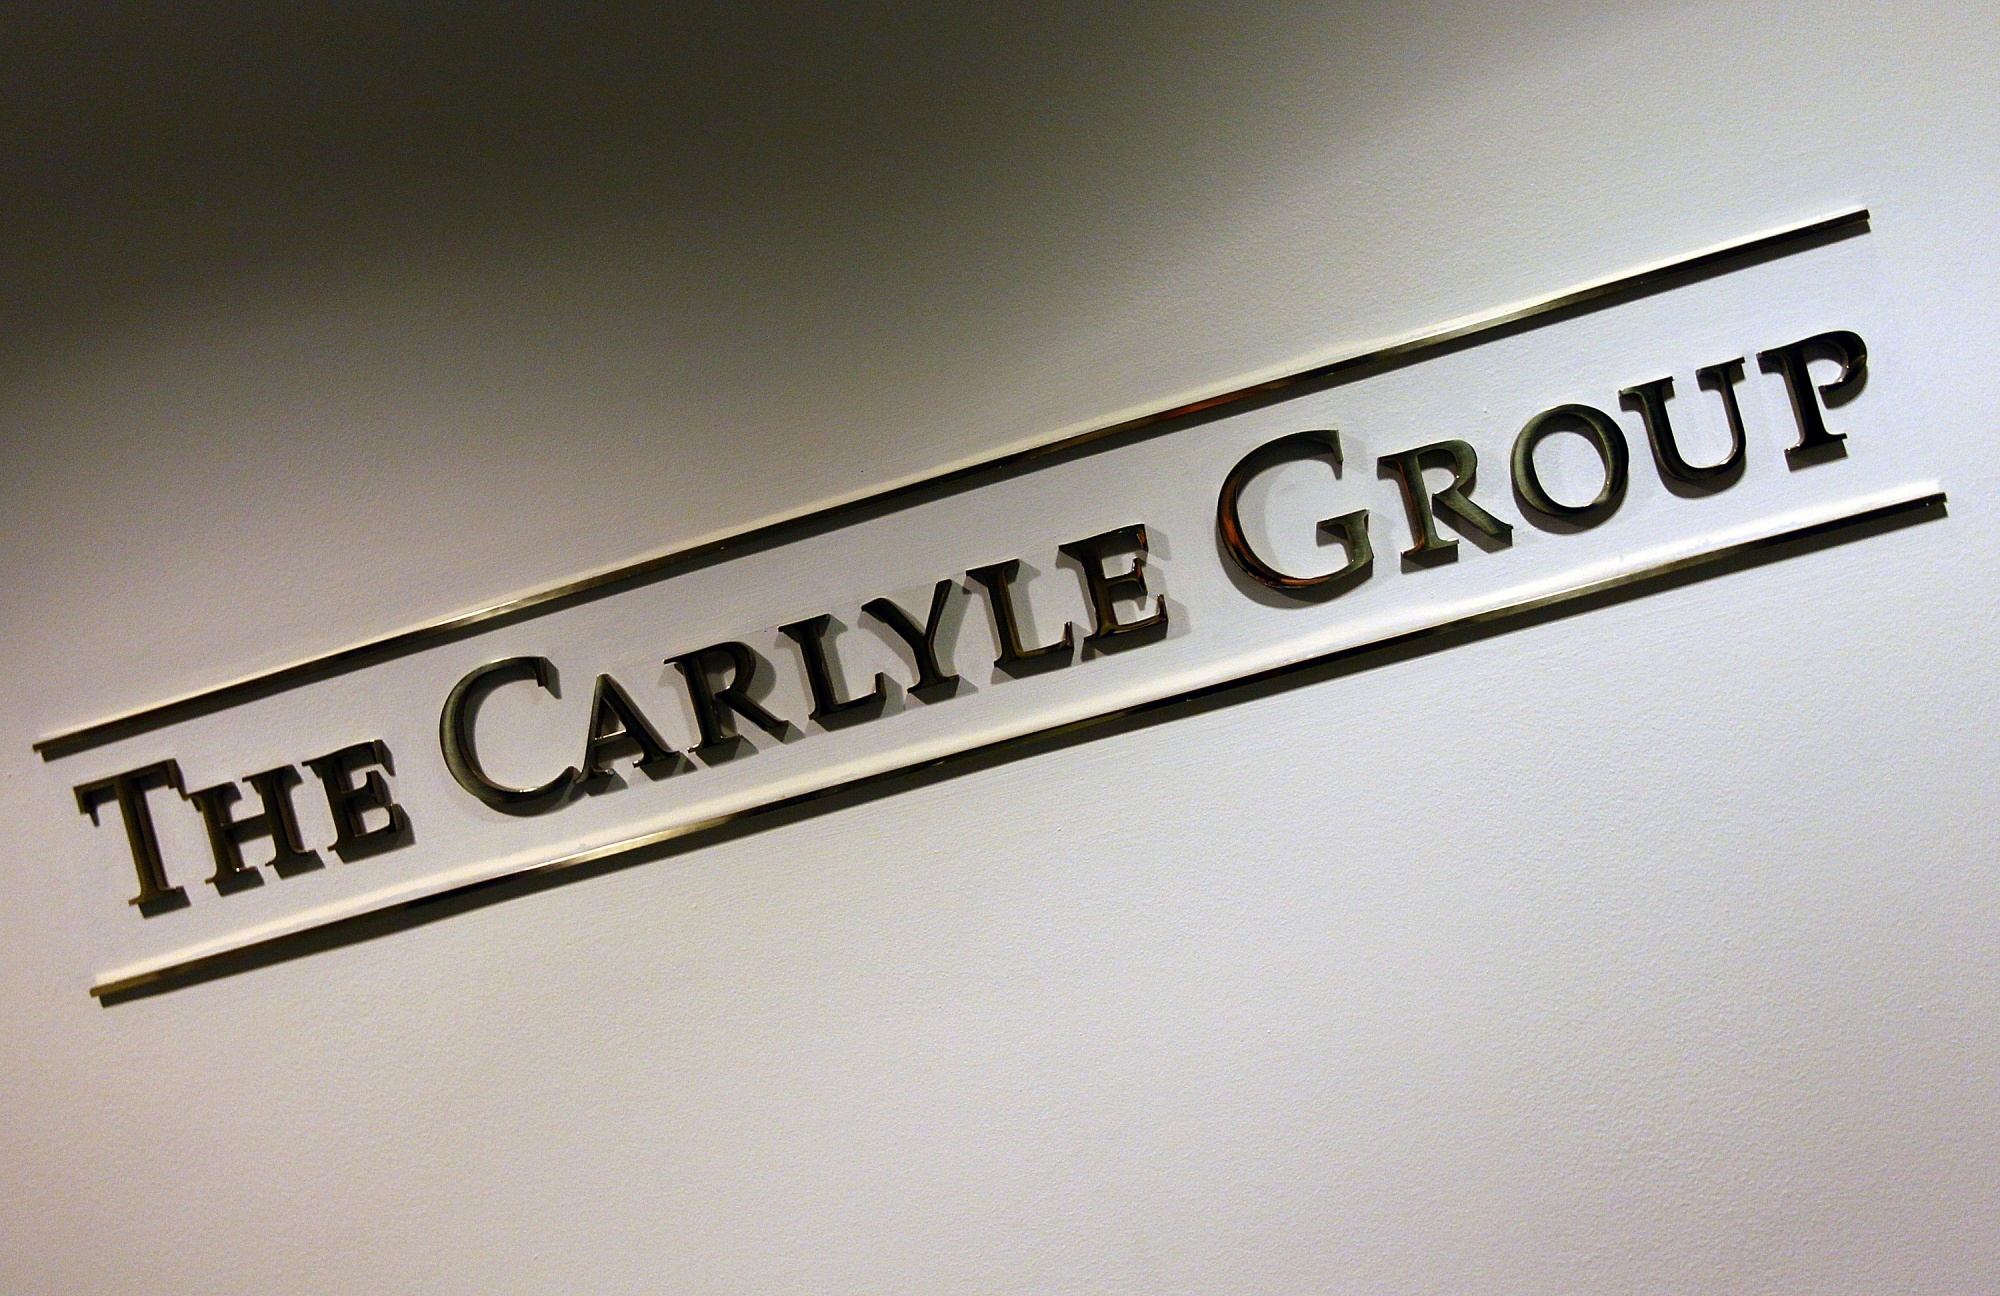 &nbsp;A sign for the Carlyle Group.